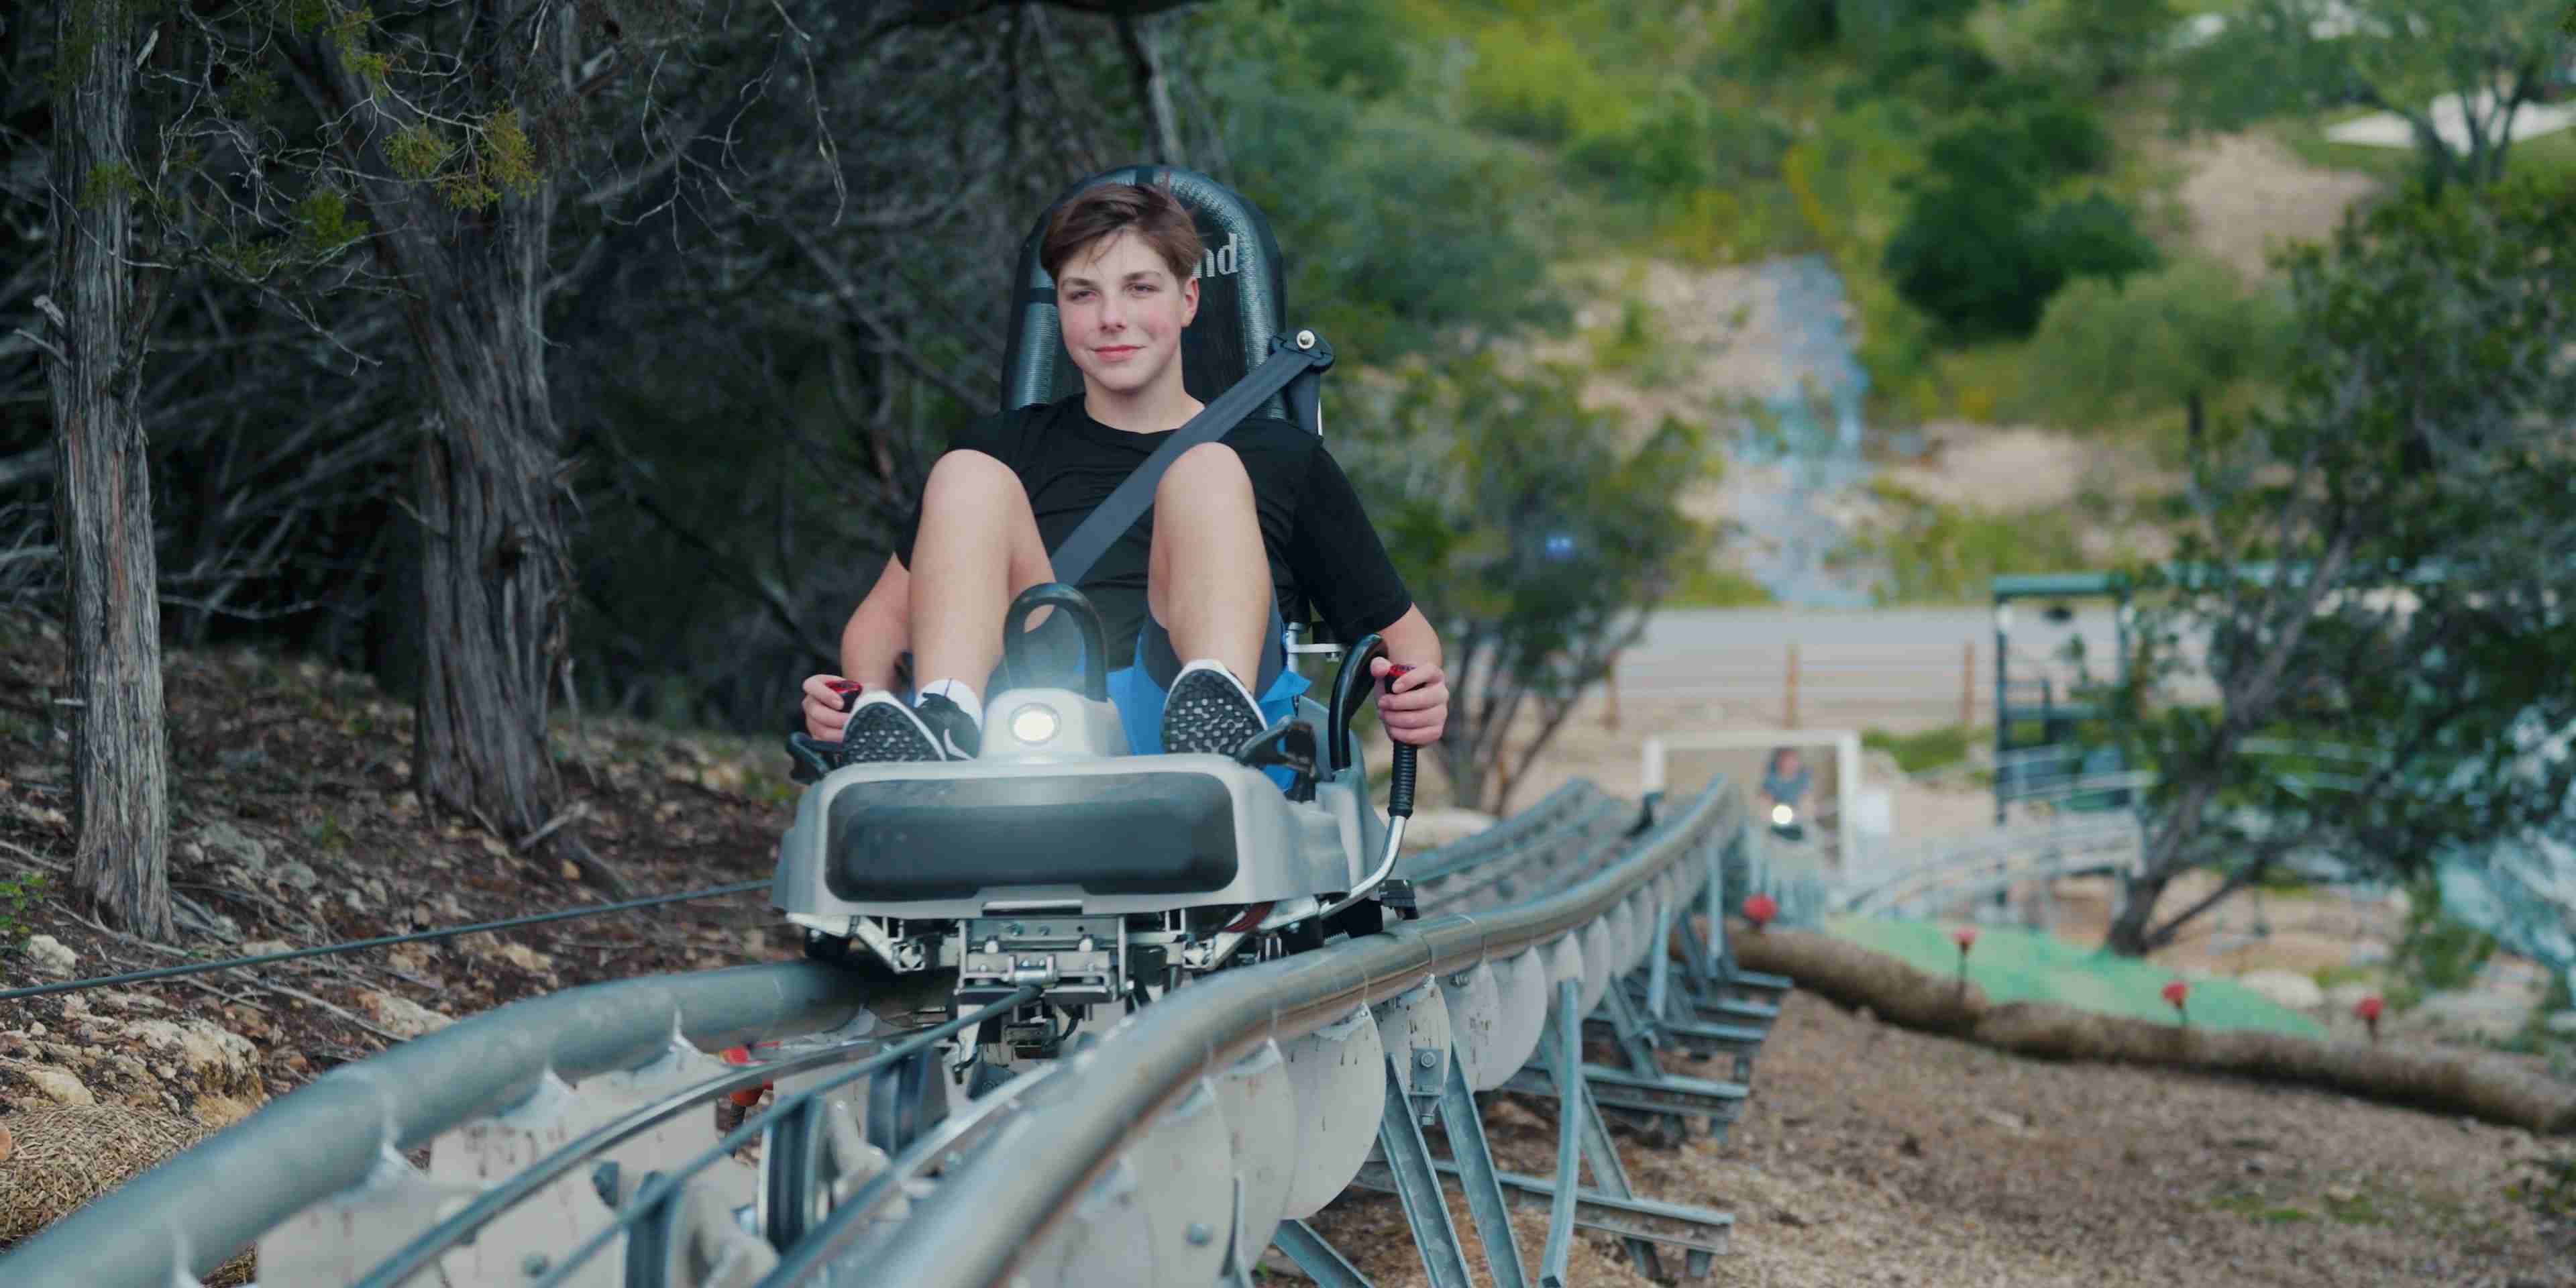 A happy guest riding The Cliff Carver at Camp Fimfo, the only alpine coaster in Texas